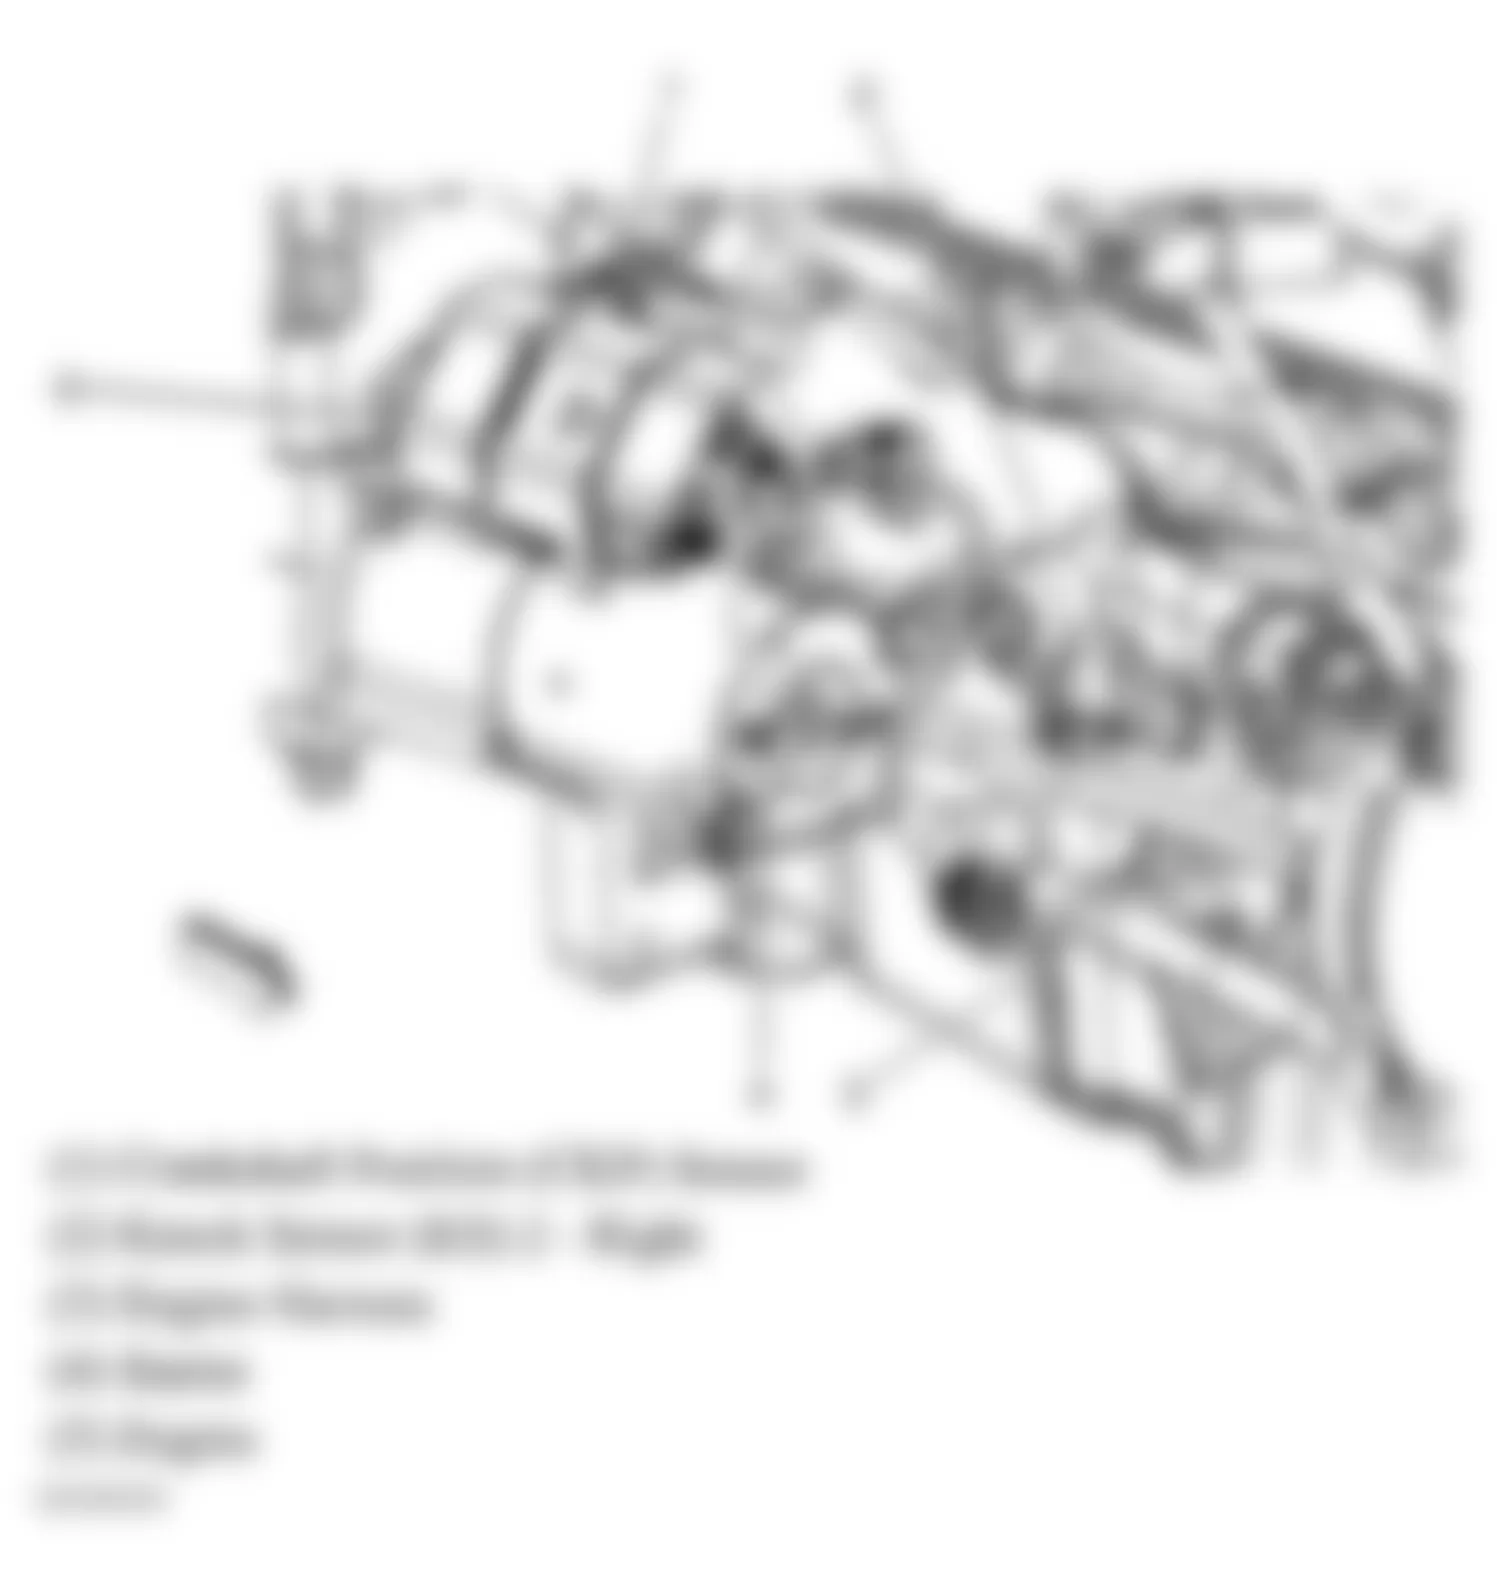 GMC Envoy 2007 - Component Locations -  Lower Right Rear Of Engine (5.3L/6.0L)